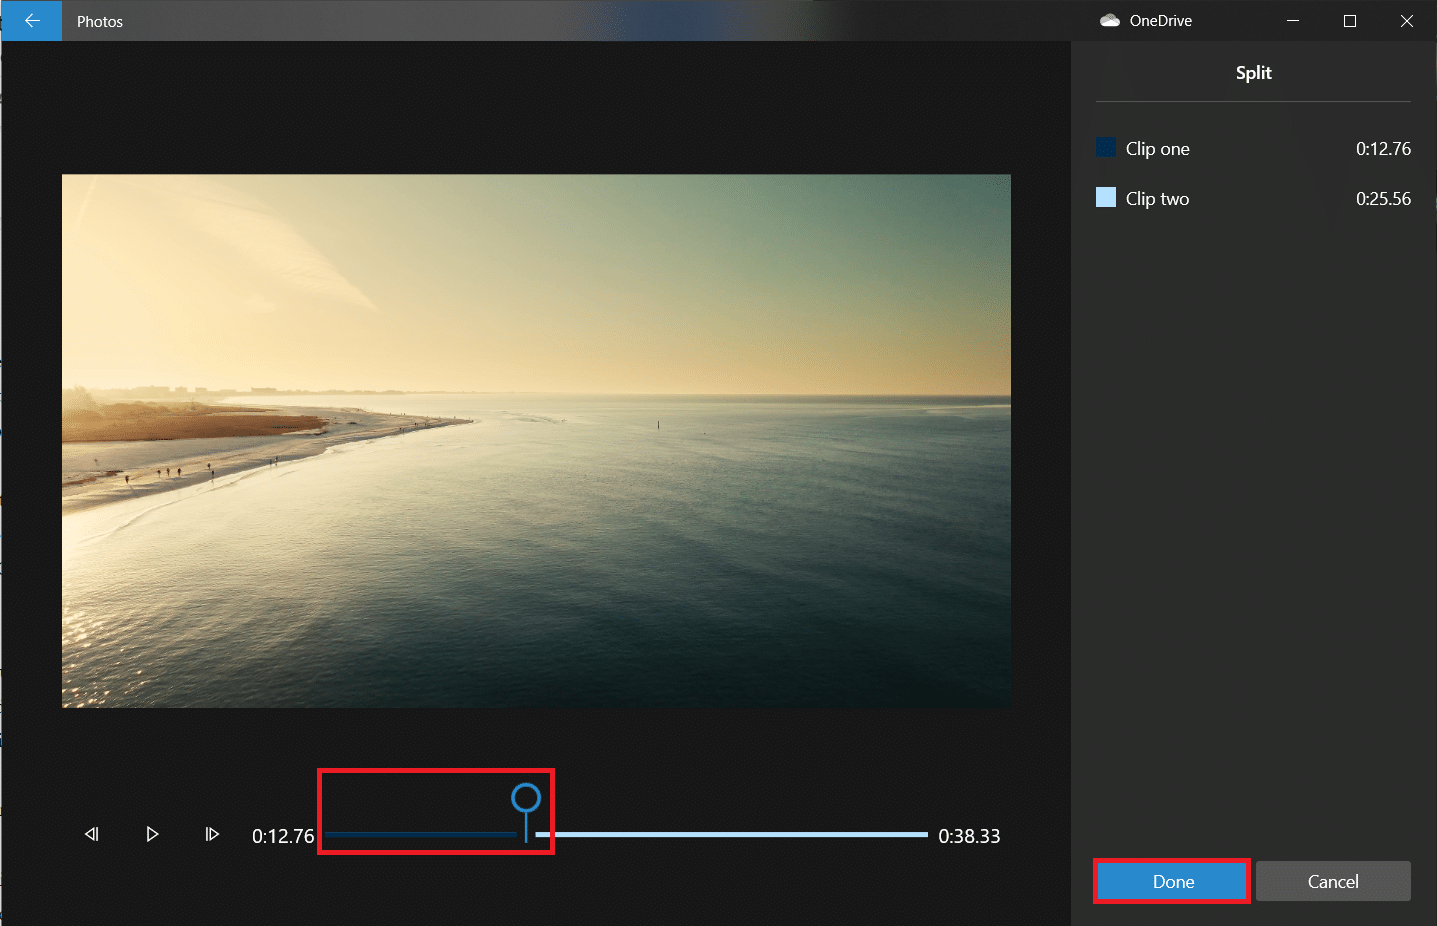 In the following window, drag the blue pointer to the timestamp which is one-third of the total video time.